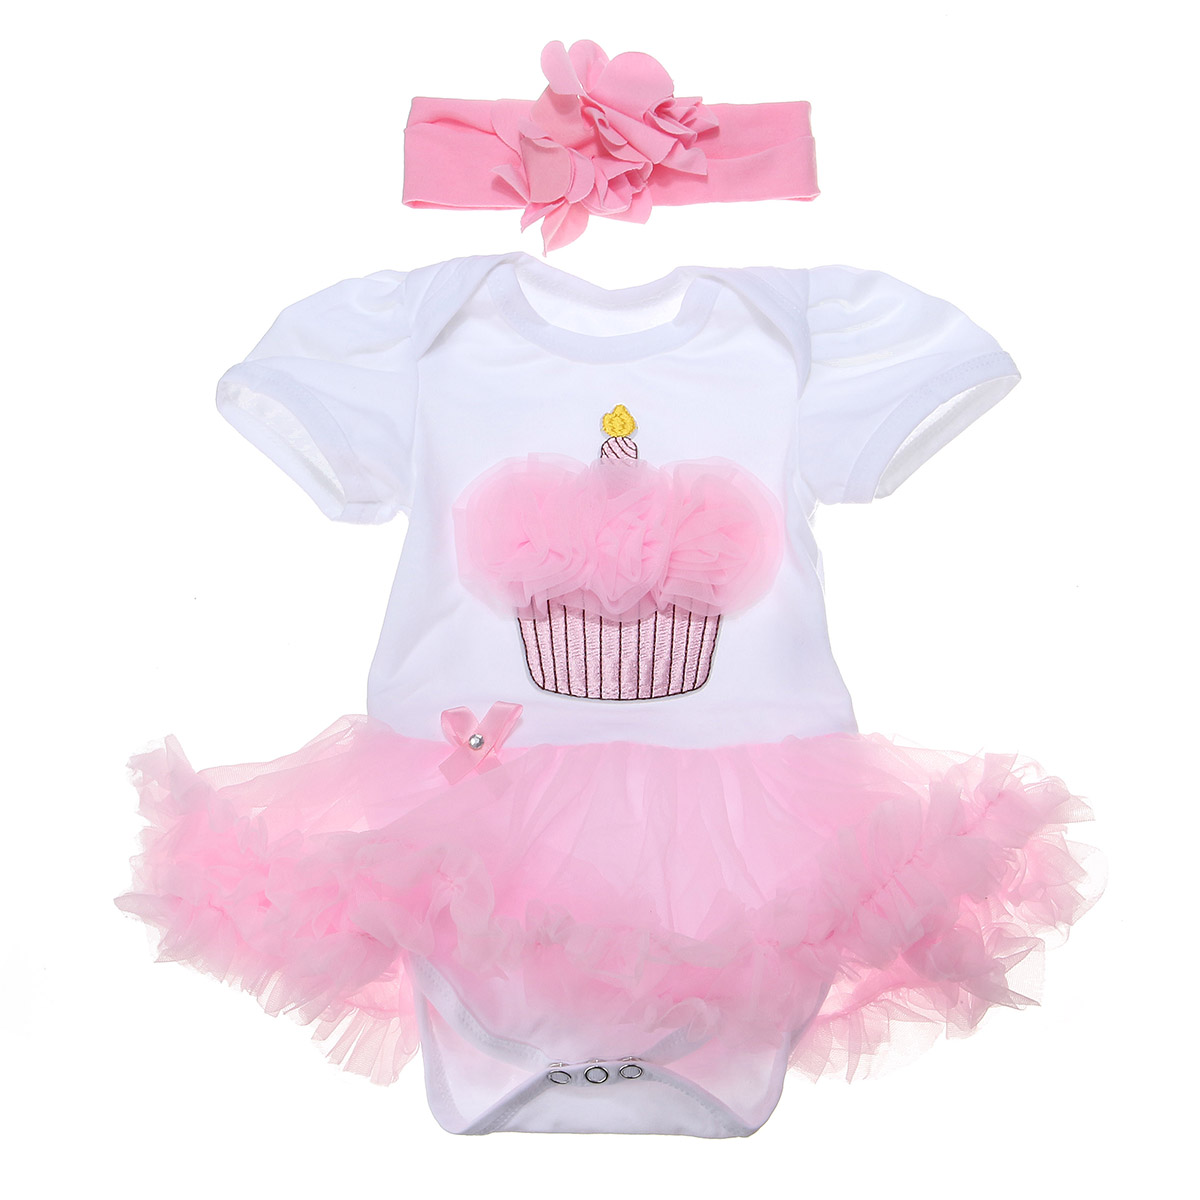 Pink Lace Dress Girl Baby Cute Clothes Set For 22inch Baby Reborn Doll ...